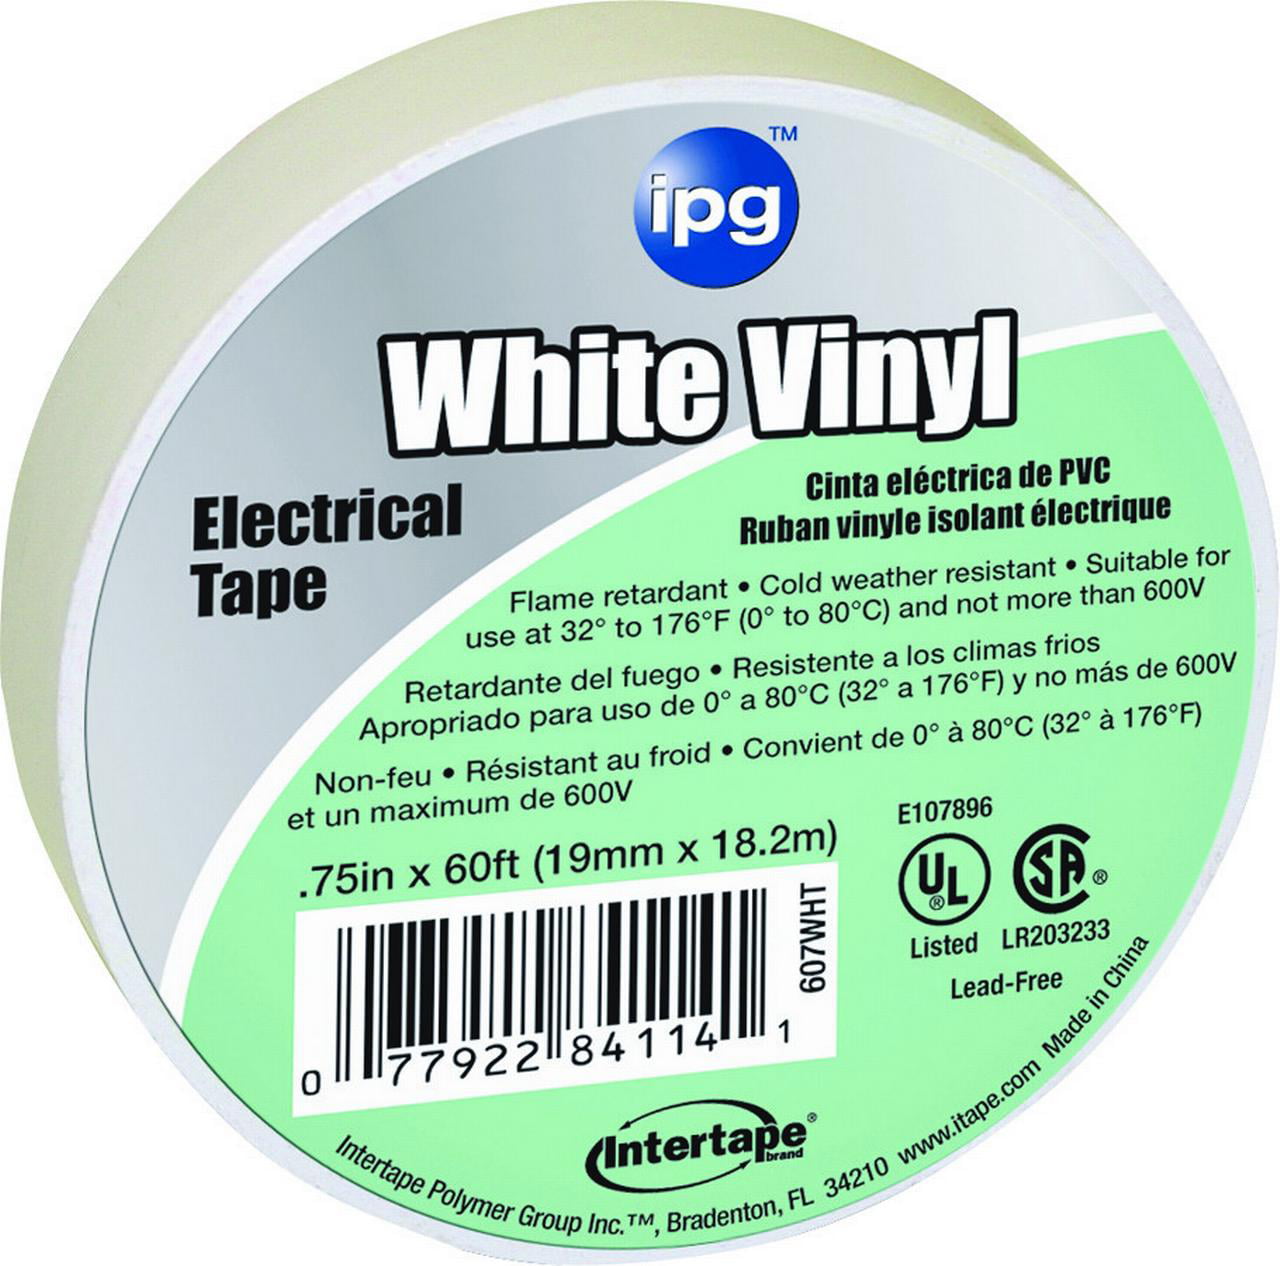 Vinyl Electrical Tape Green Intertape 85827 3 Pack  .75 in x 60 ft 